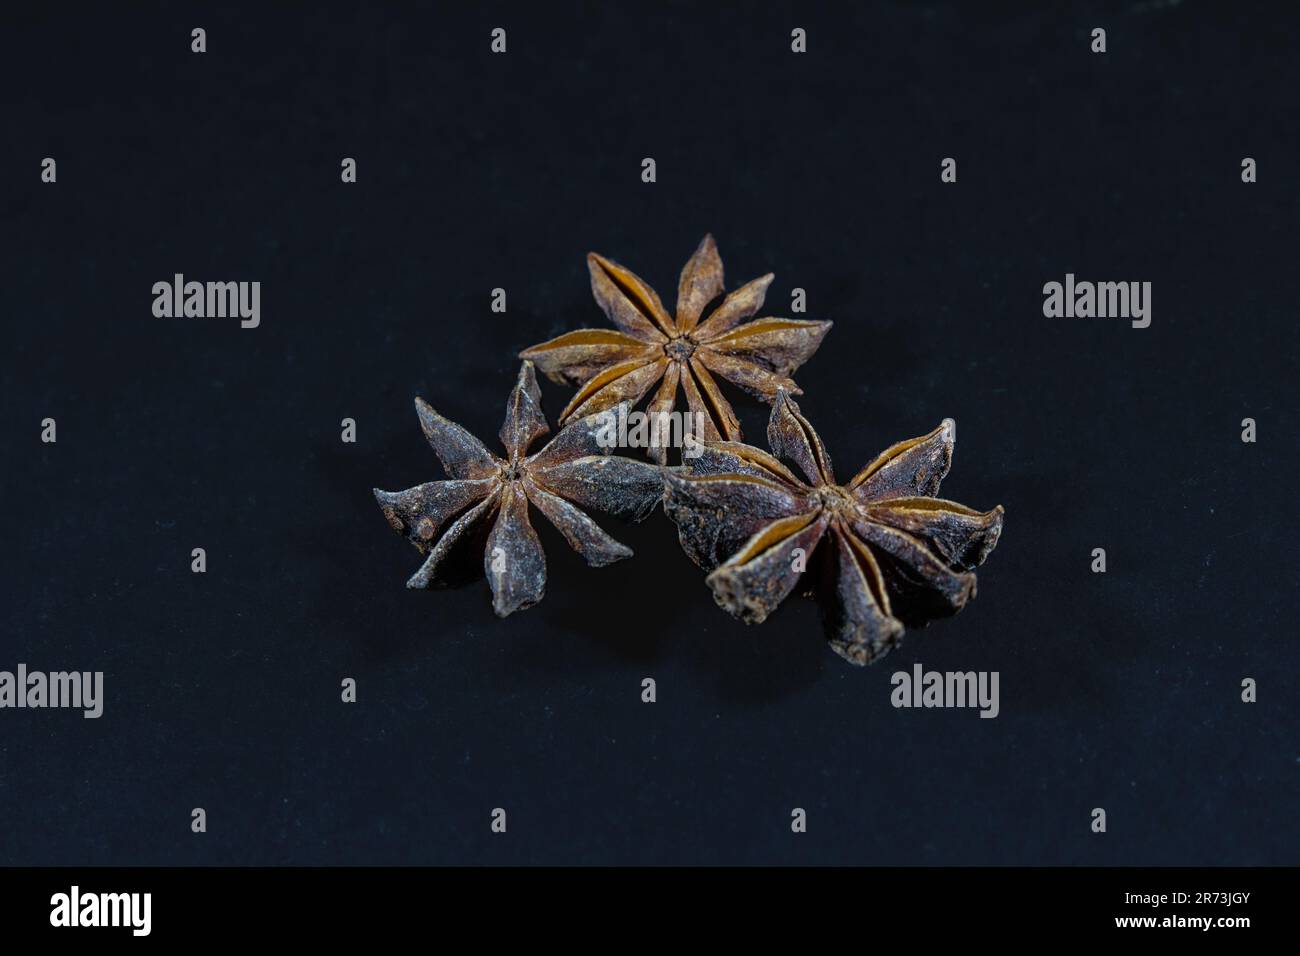 Picture of a star anise on a black background. Anise, also called aniseed or rarely anix is a flowering plant in the family Apiaceae native to the eas Stock Photo